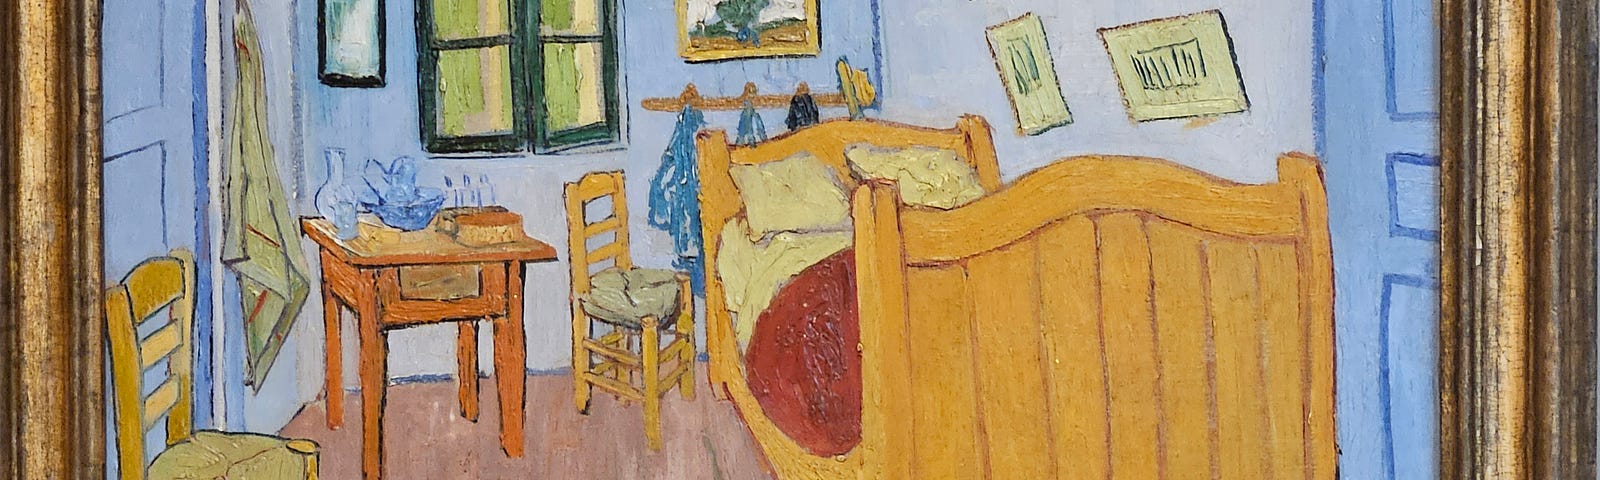 A painting. Van Gogh’s ‘The Bedroom’